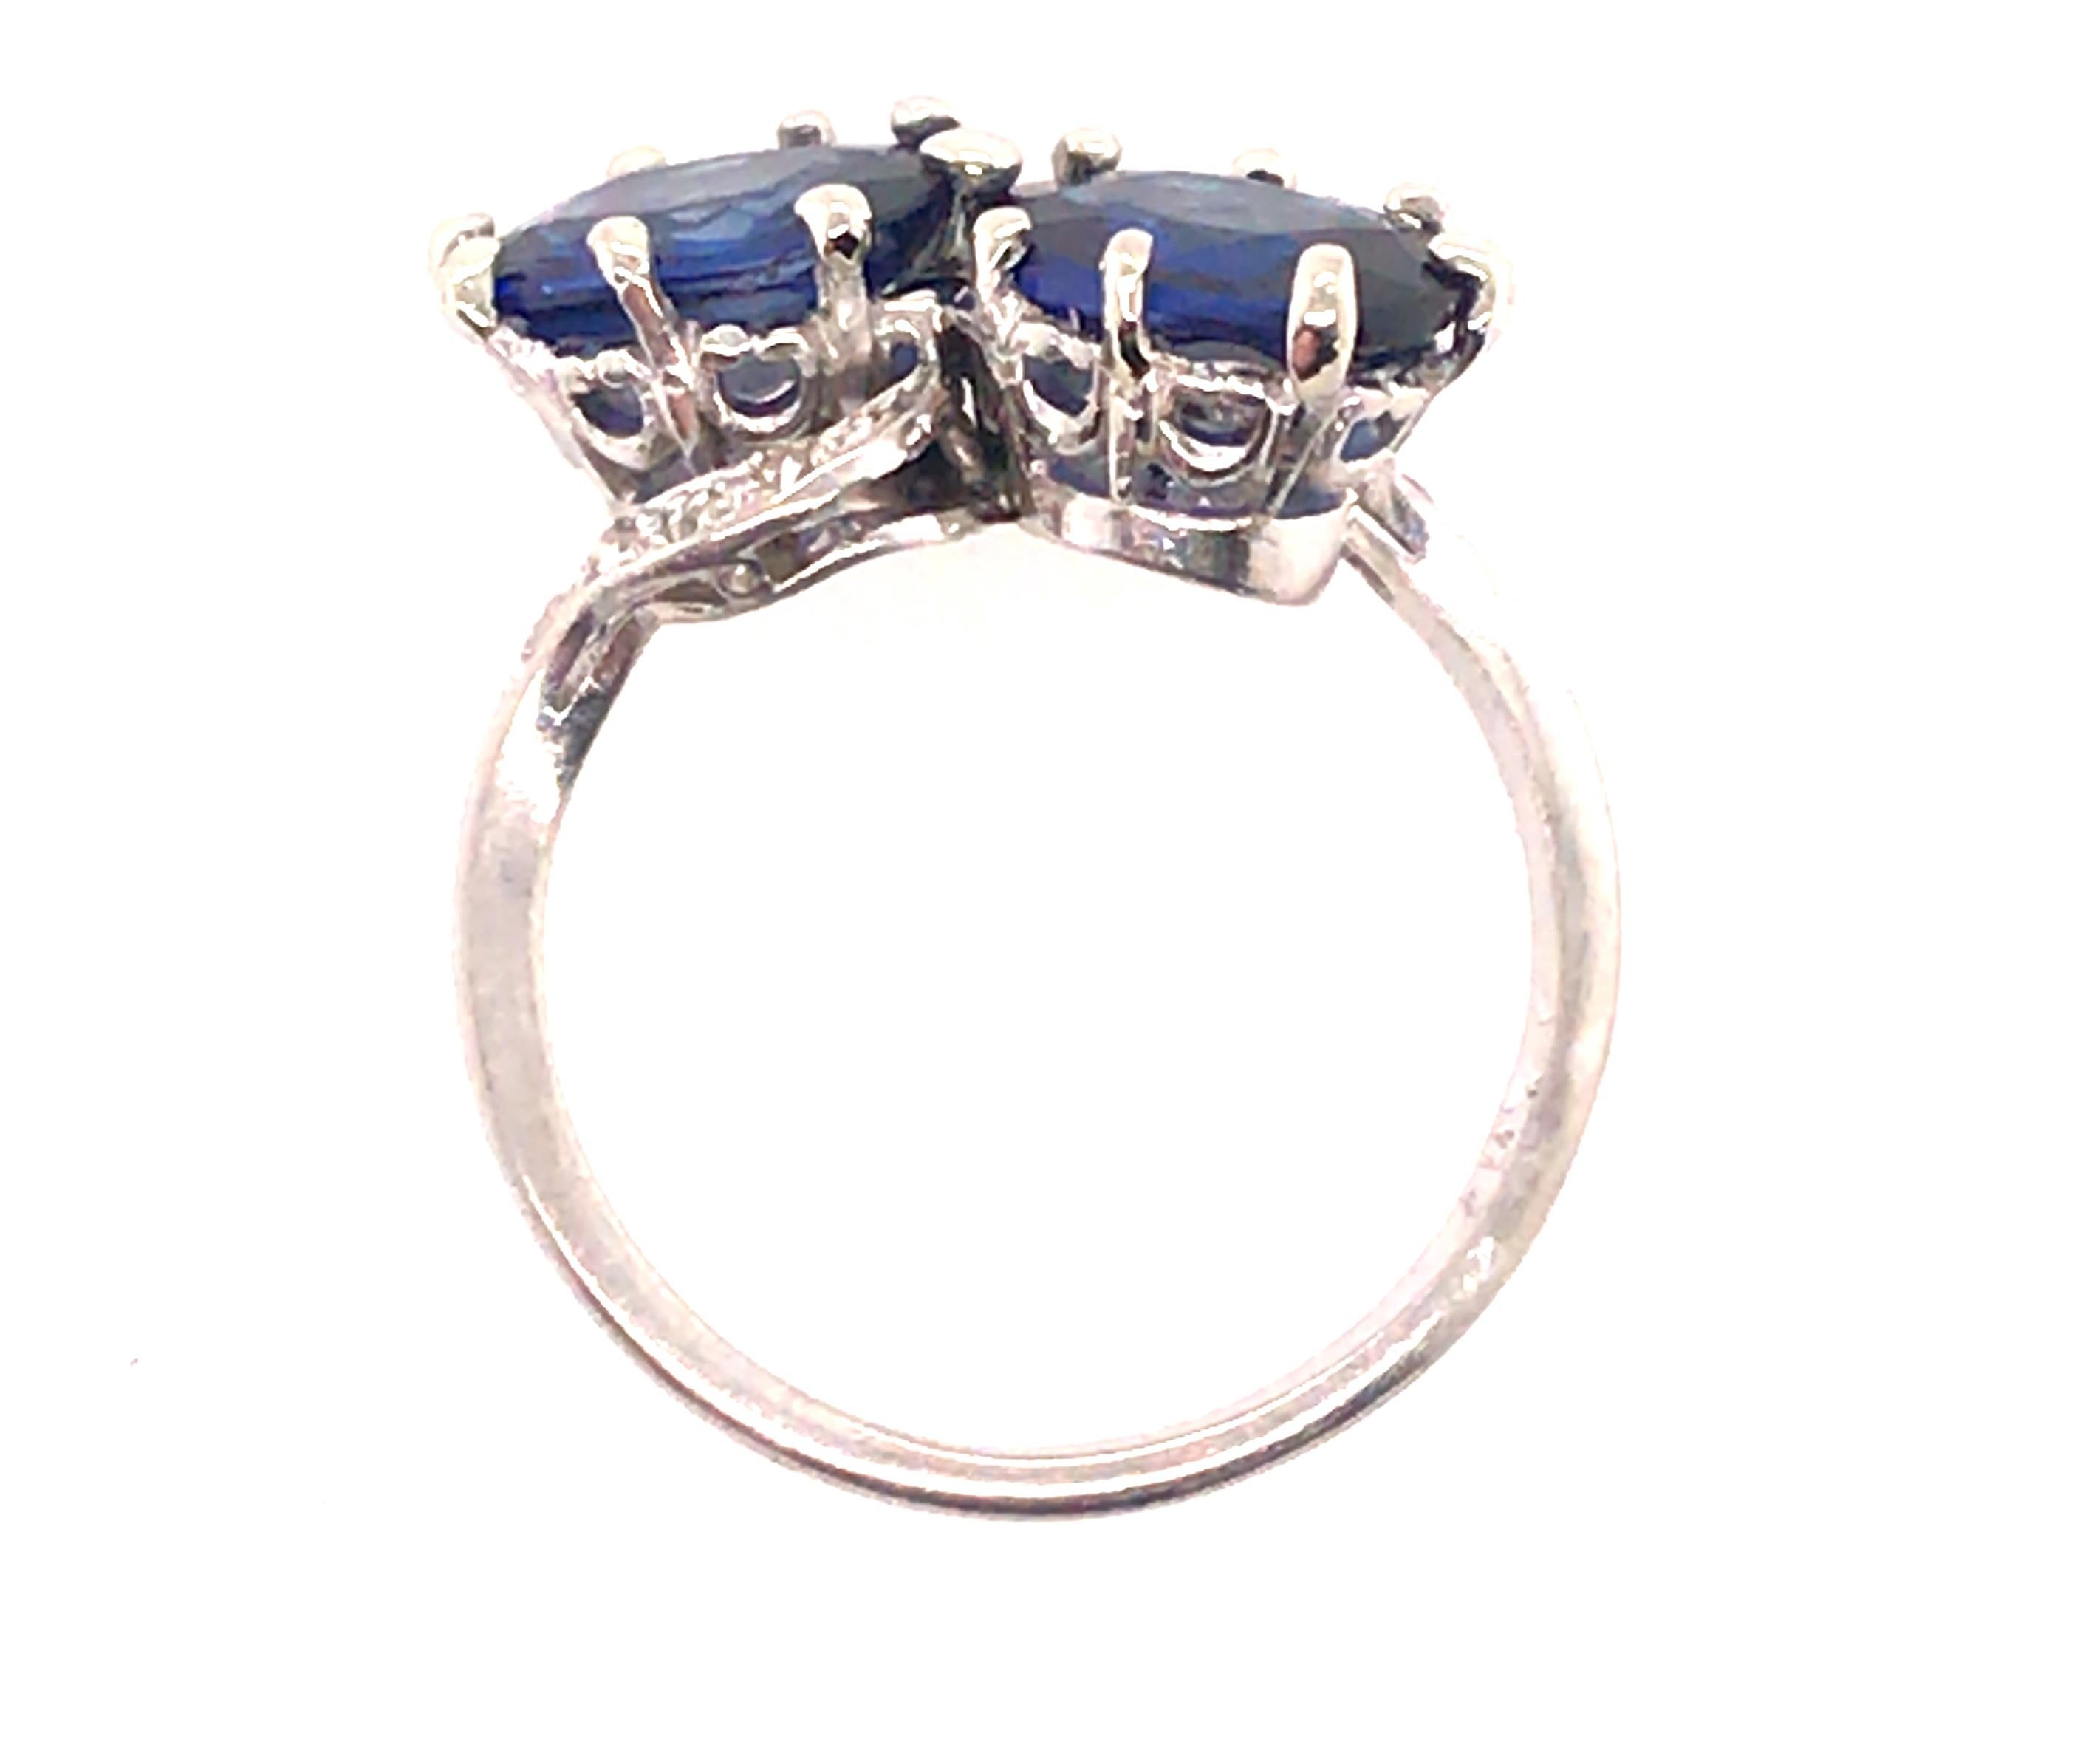 Genuine Original Edwardian Antique from 1900's Vintage Bypass Sapphire Diamond Cocktail Ring 3.91ct Platinum 


Featuring 2 Brilliant Bold Natural Blue Oval Cut Sapphires Totaling 3.75ct 

Each Sapphire is Nearly 2 Carats

Genuine Rose Cut Natural